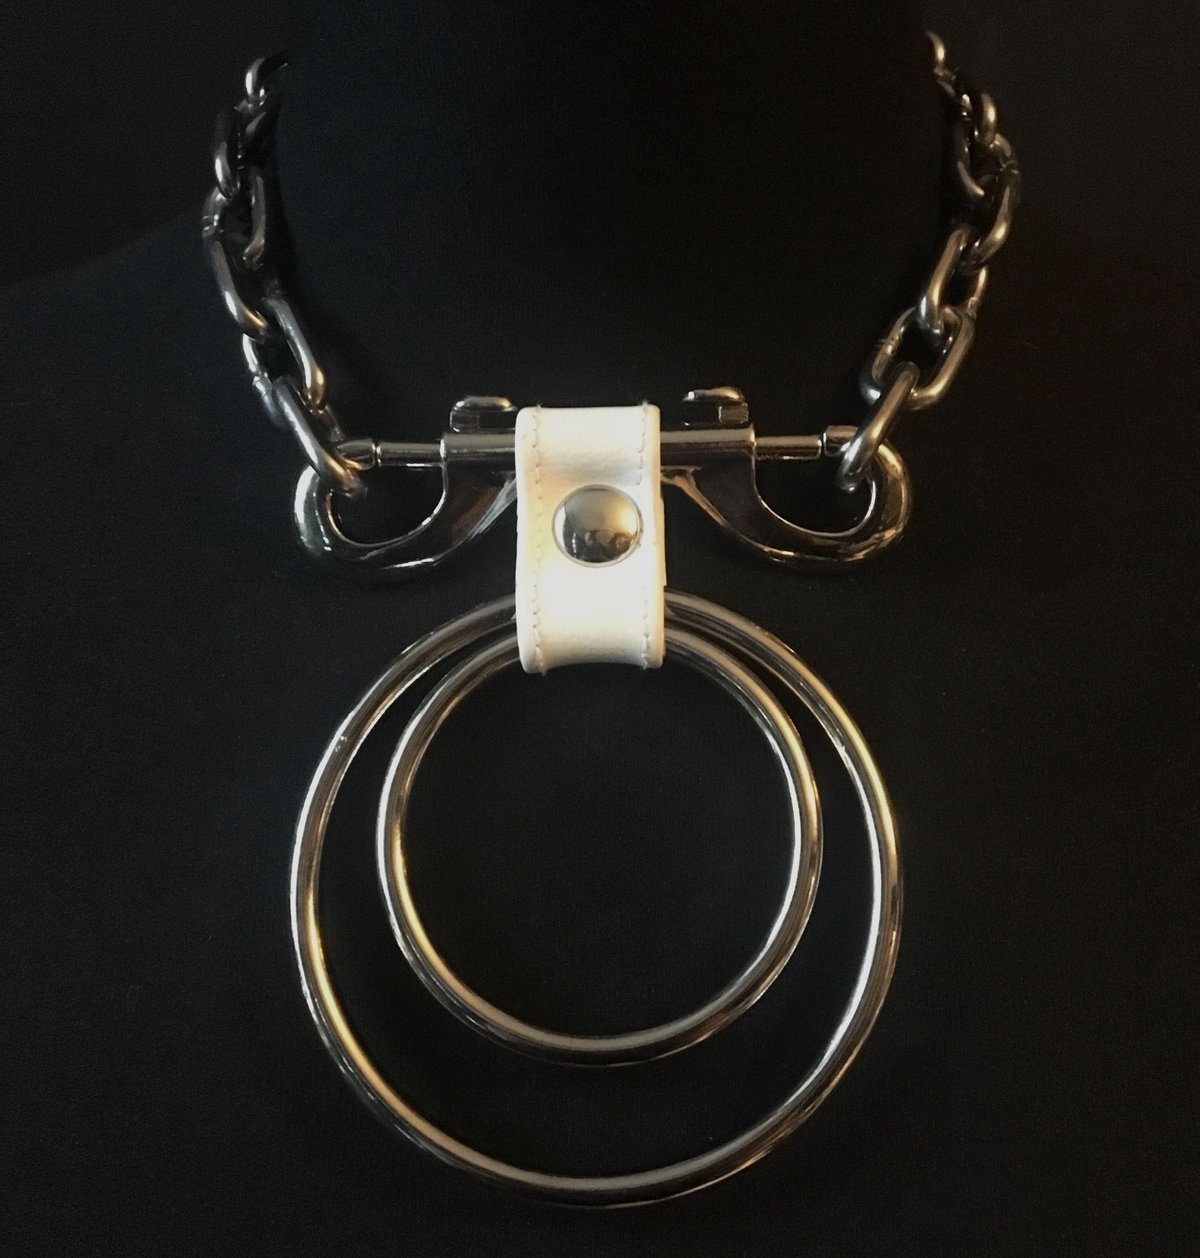 Double ring necklace white vegan leather